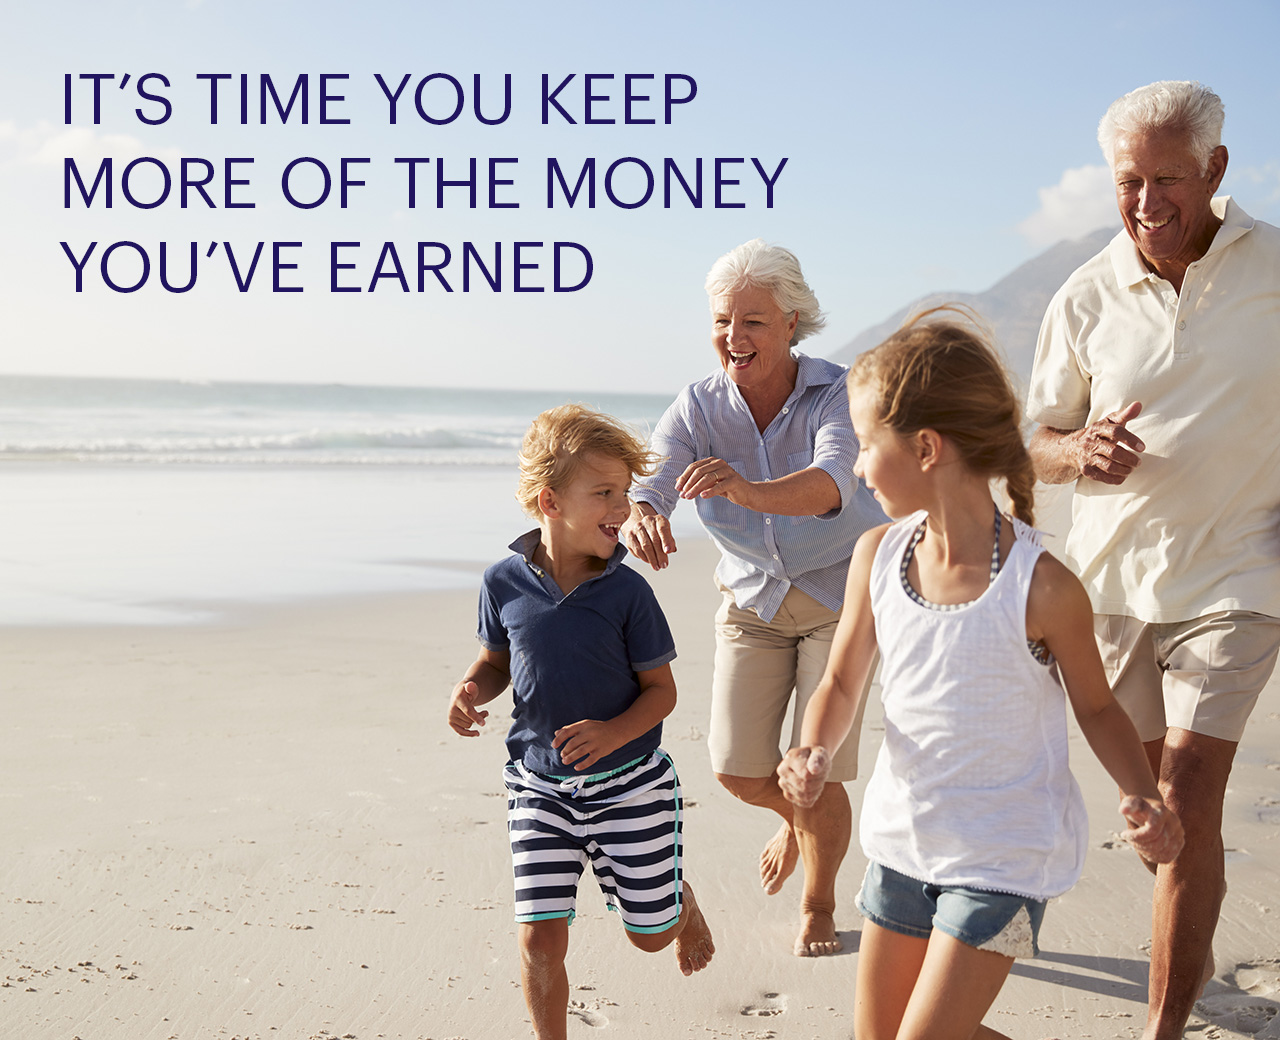 It's Time You Keep More of the Money You Earned